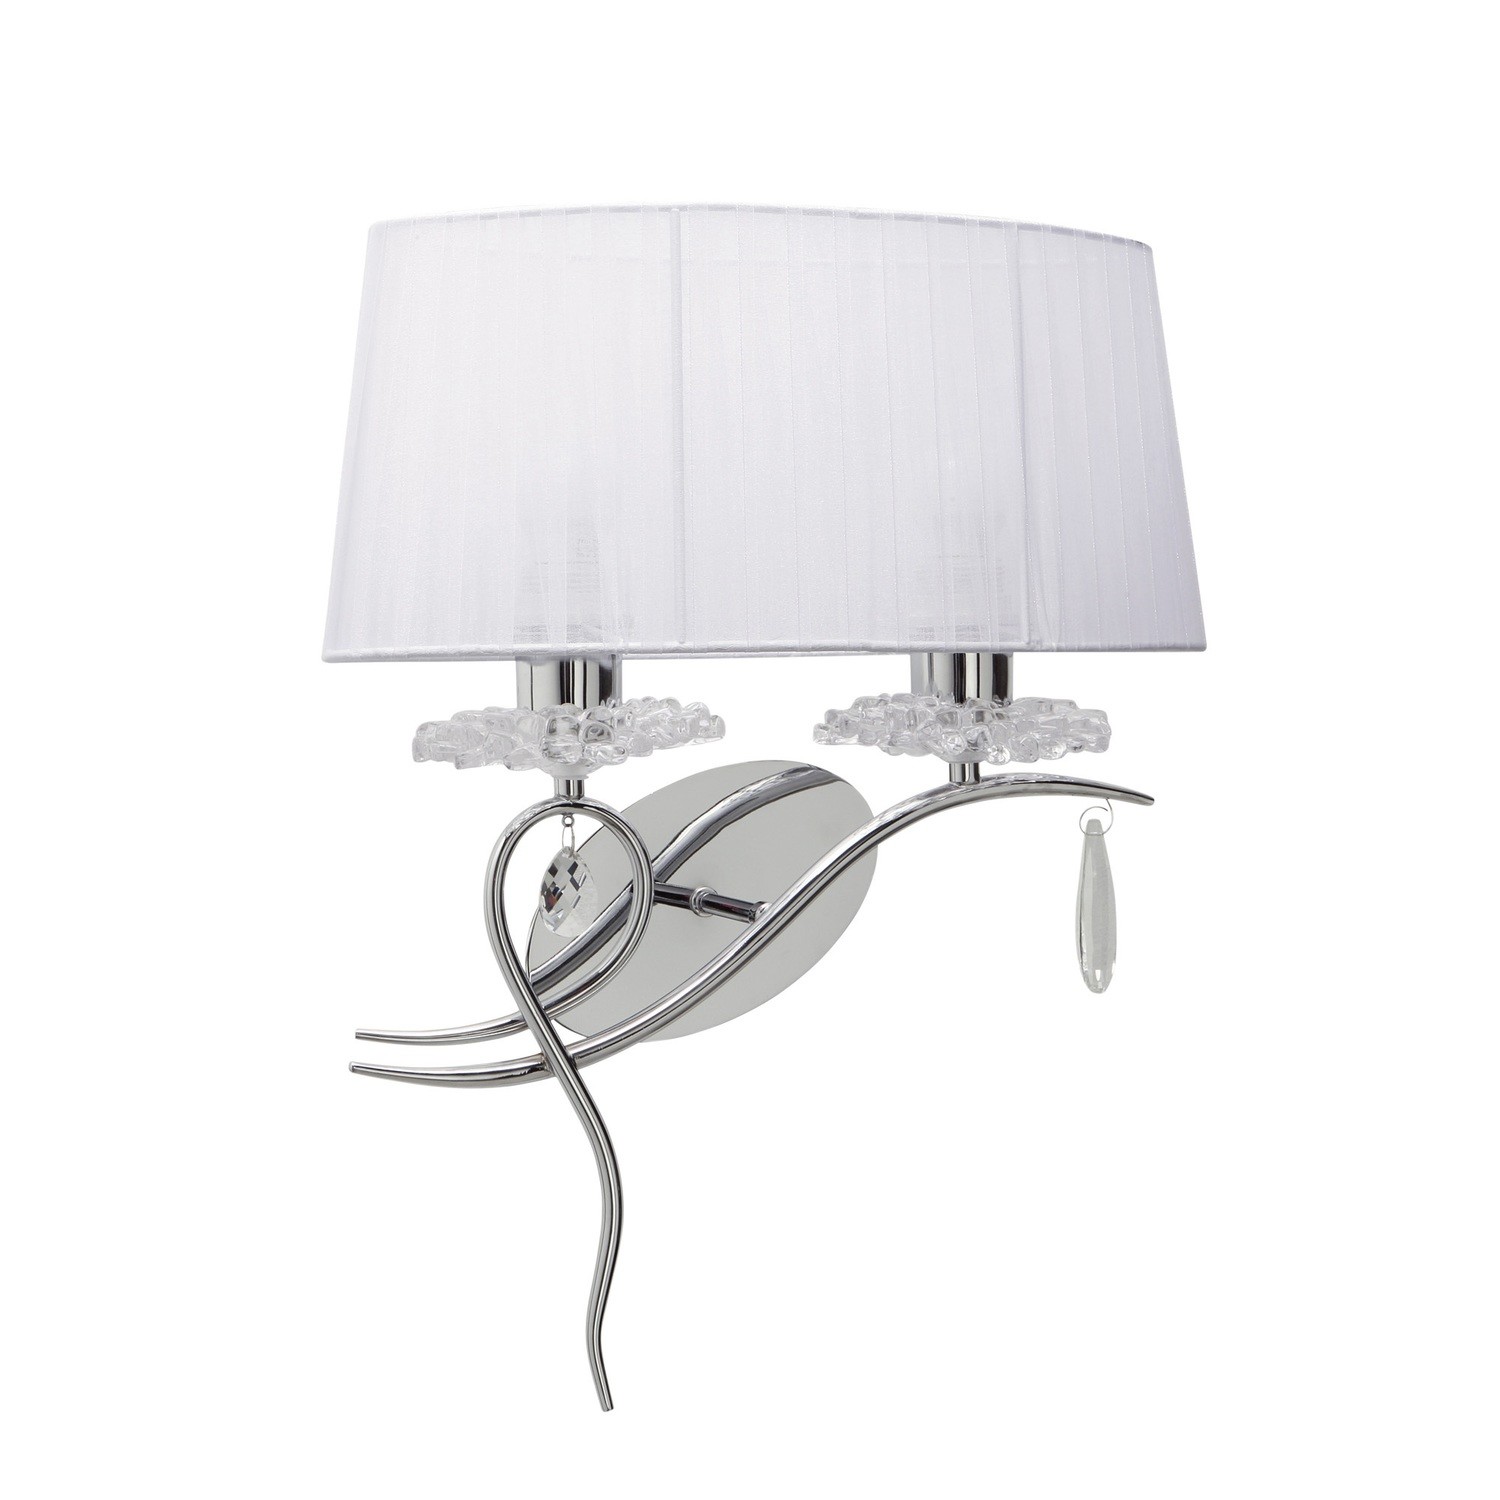 Louise Wall Lamp Right 2 Light E27 With White Shade Polished Chrome/Clear Crystal